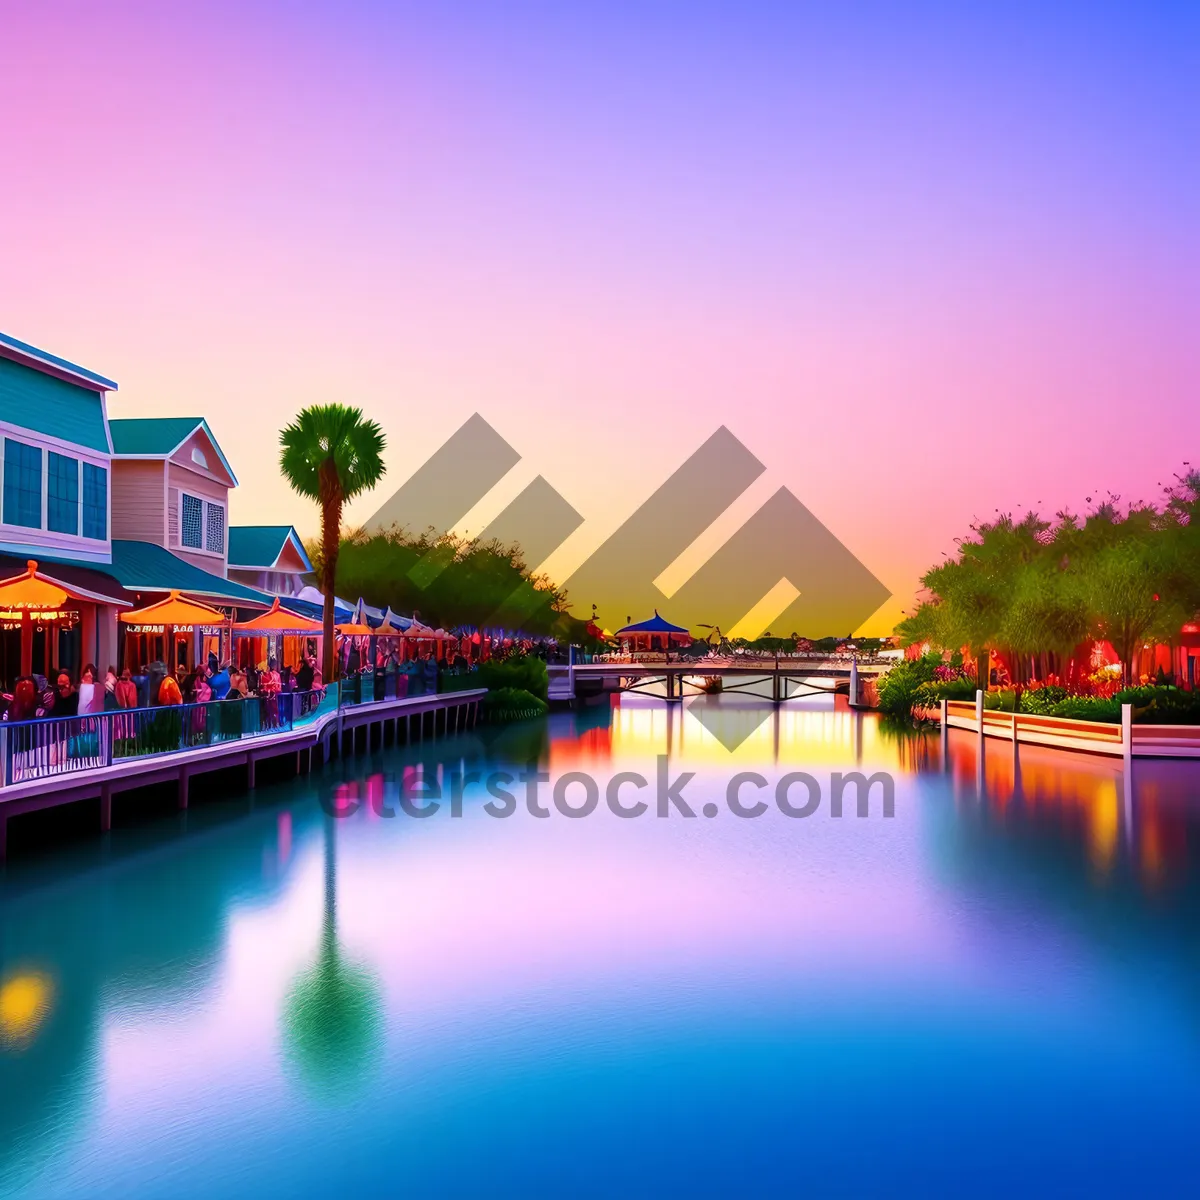 Picture of Serene Summer Retreat: Reflections of a Waterfront Resort